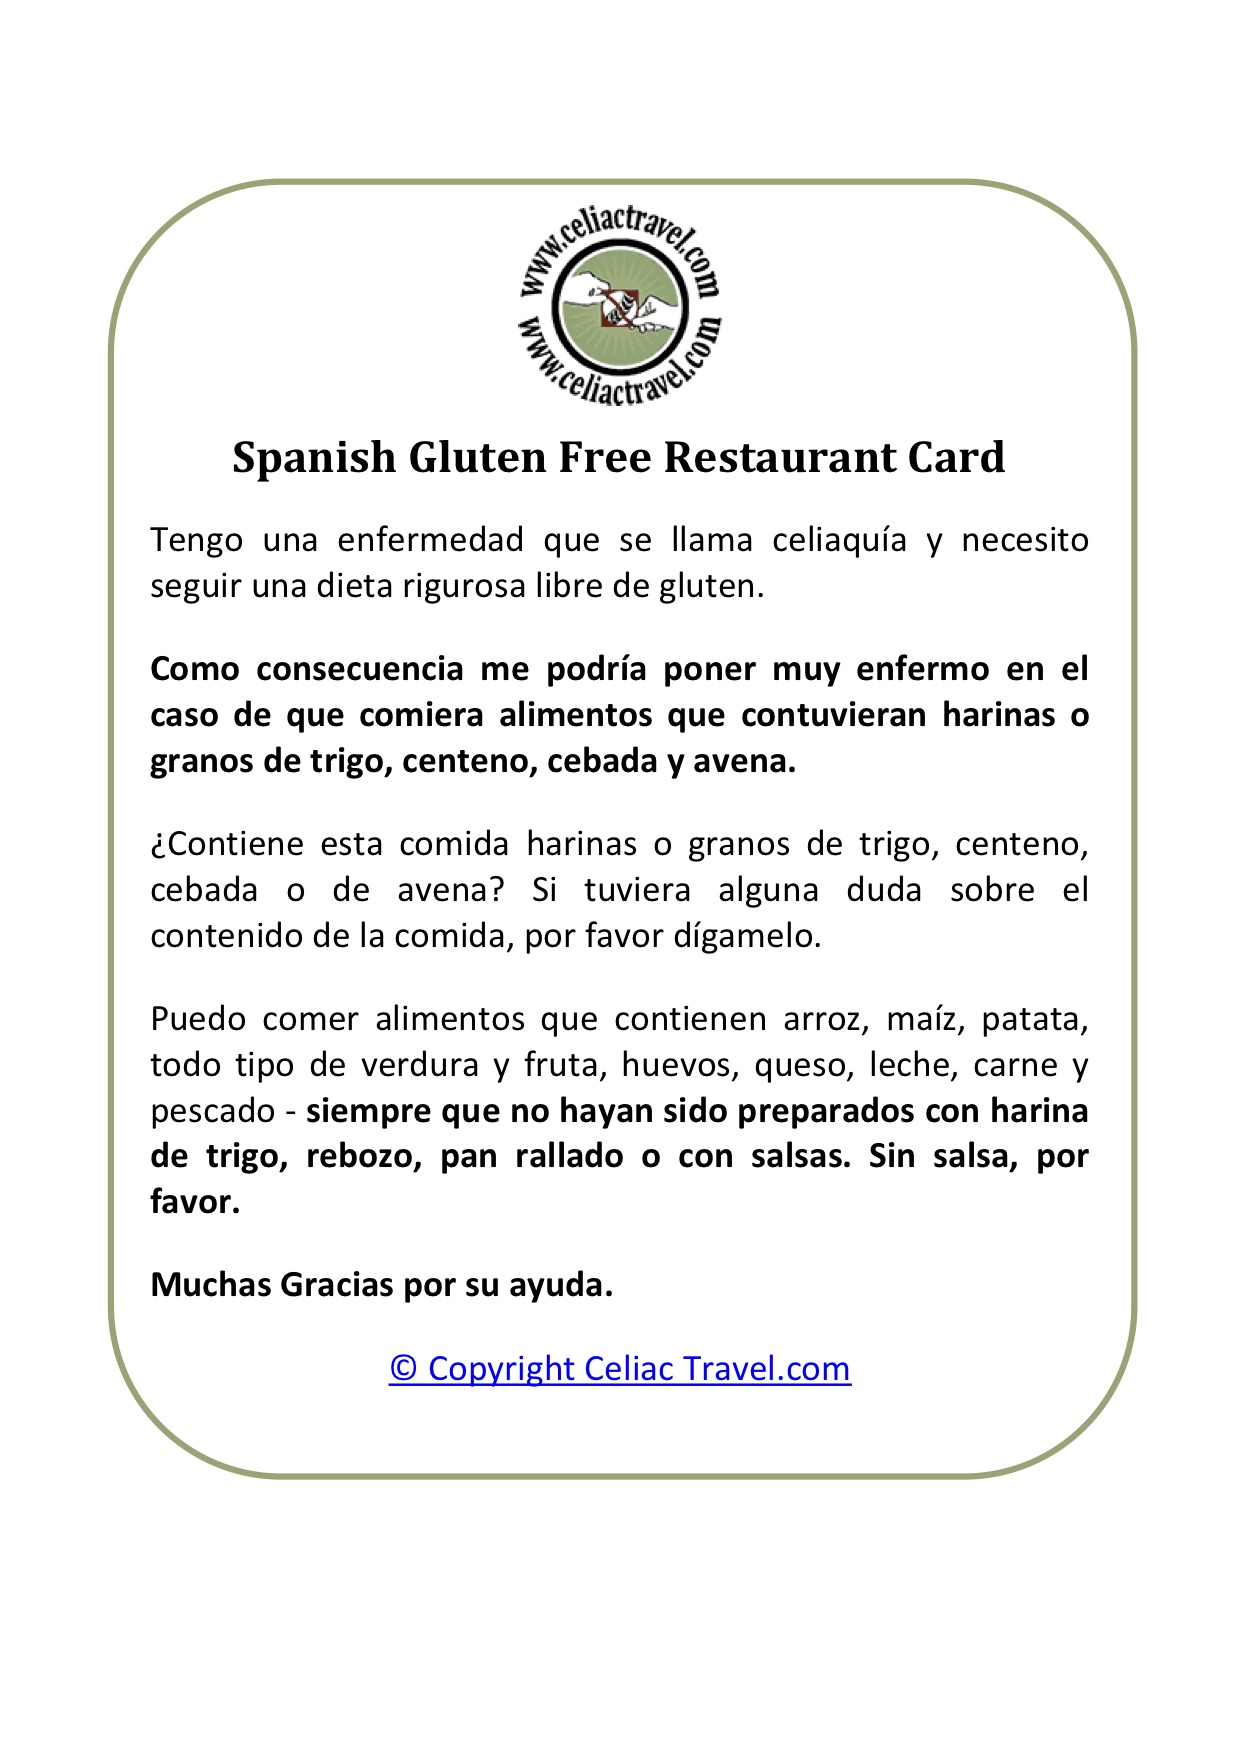 A gluten-free health certificate in Spanish to give your server.